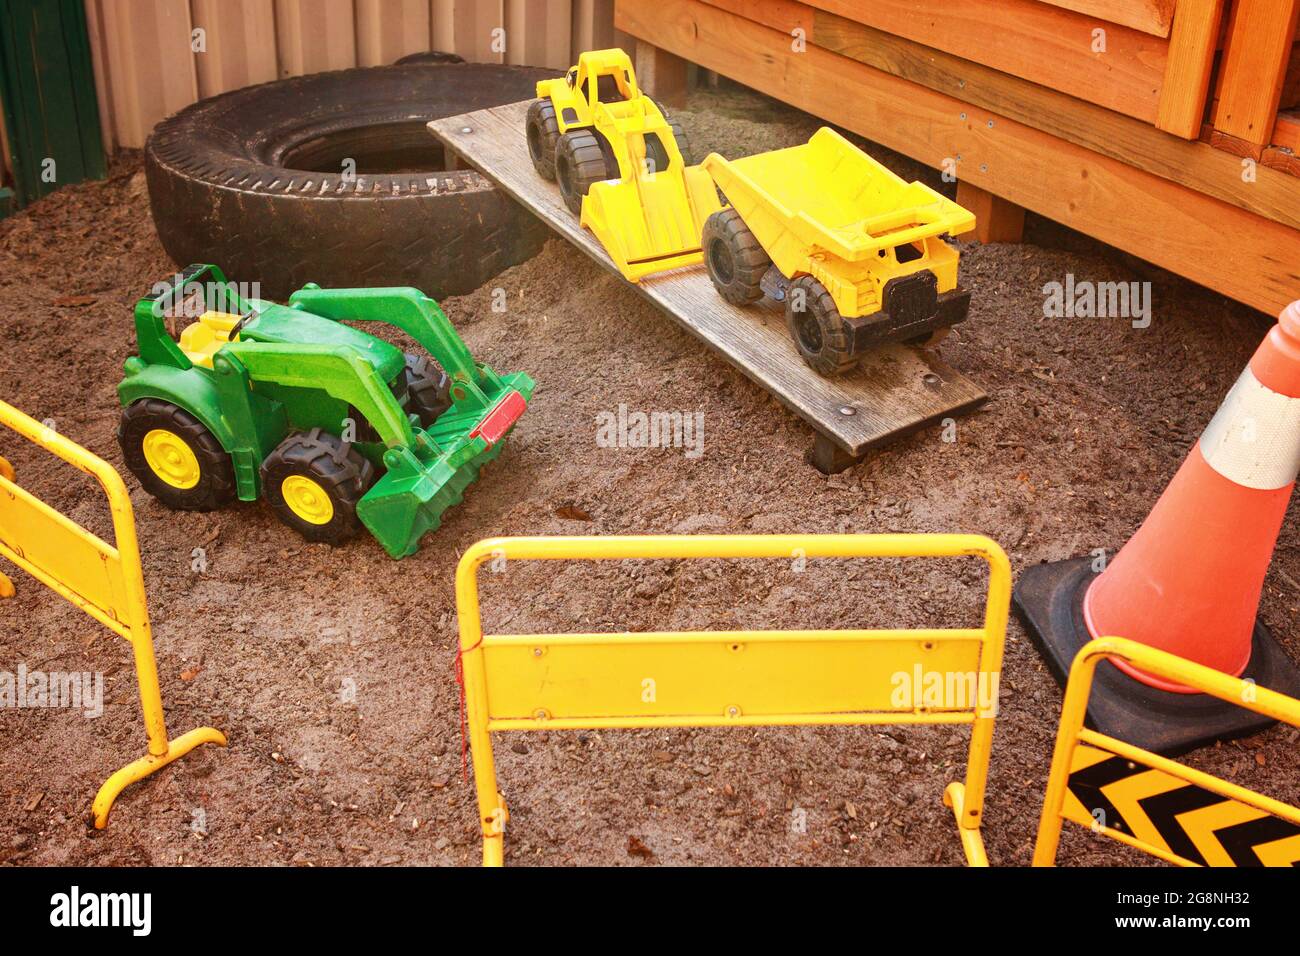 Toy diggers in an outdoor play construction site Stock Photo